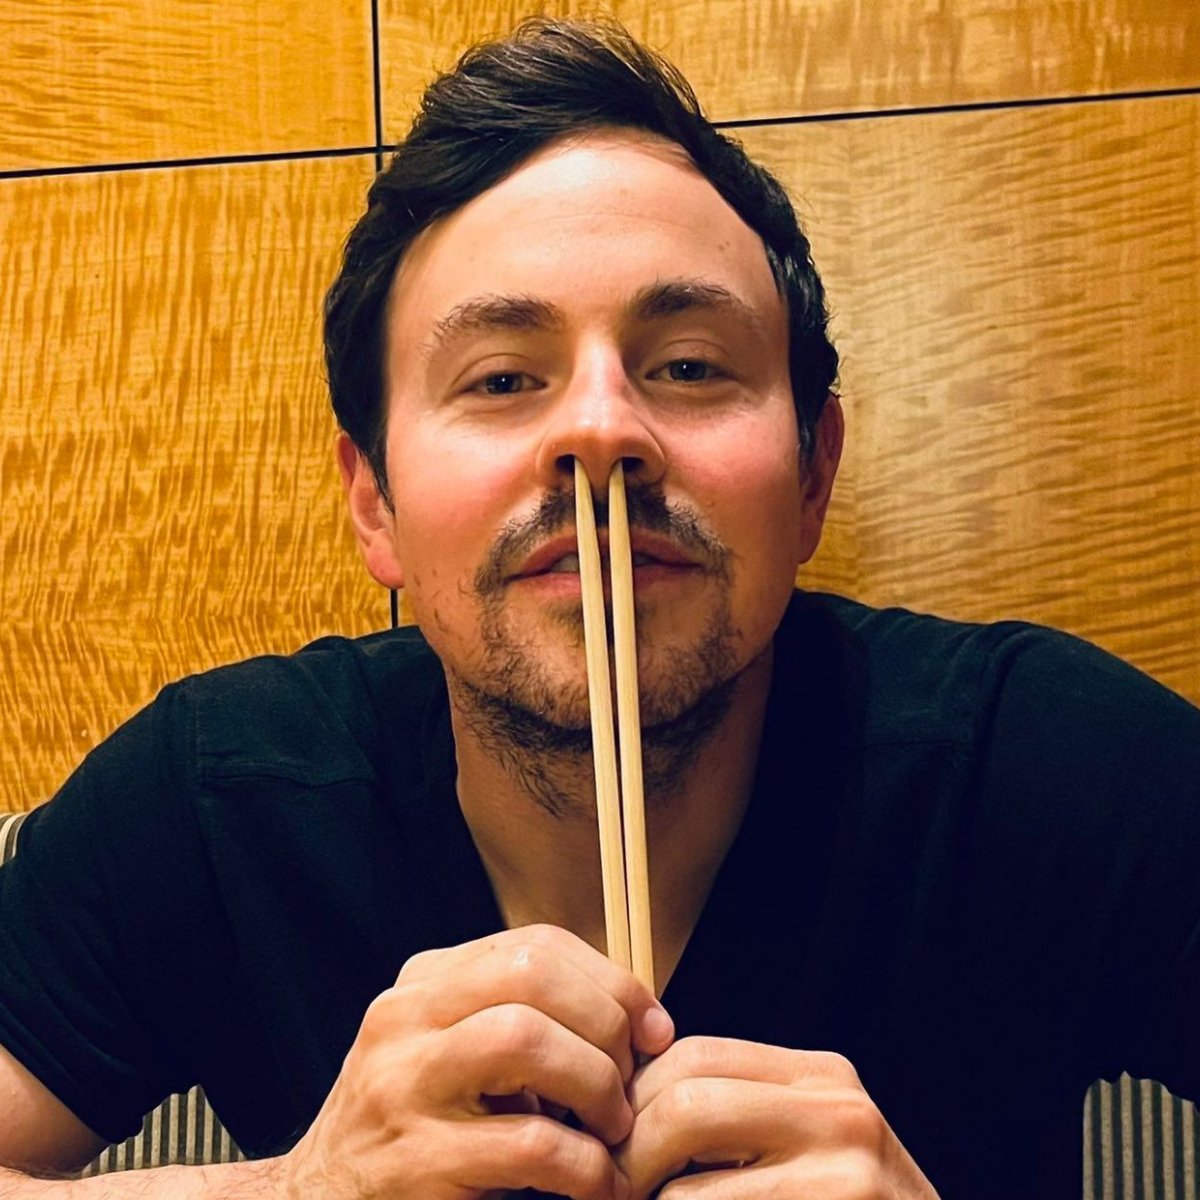 GM and Happy #ChopsticksDay

Celebrate the versatility and beauty of this traditional utensil. Whether you're enjoying sushi, stir-fry or noodles, chopsticks add an extra touch of elegance to every meal!

Or, be like @ryancohen 

#ChopsticksFashion #FunForAll #GME #L2Community